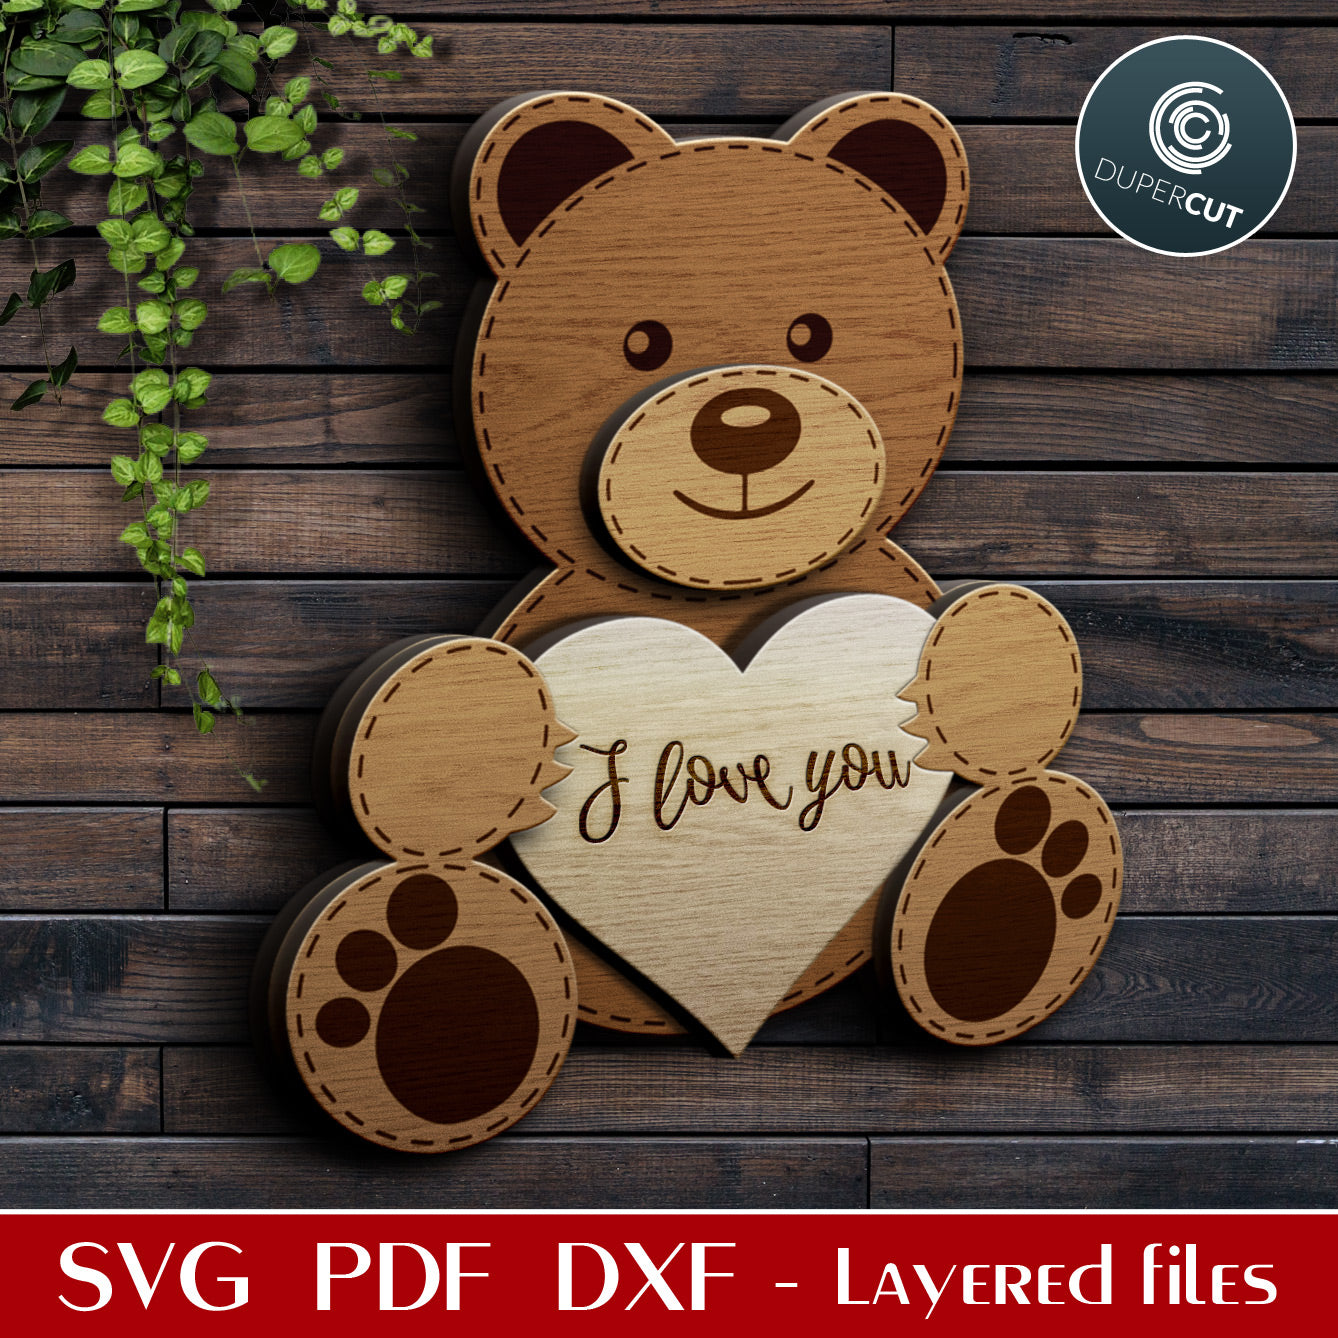 Teddy bear with heart - dual-layer Valentine's Day template - SVG PDF laser cutting files for Glowforge, Cricut, Silhouette, CNC Plasma machines